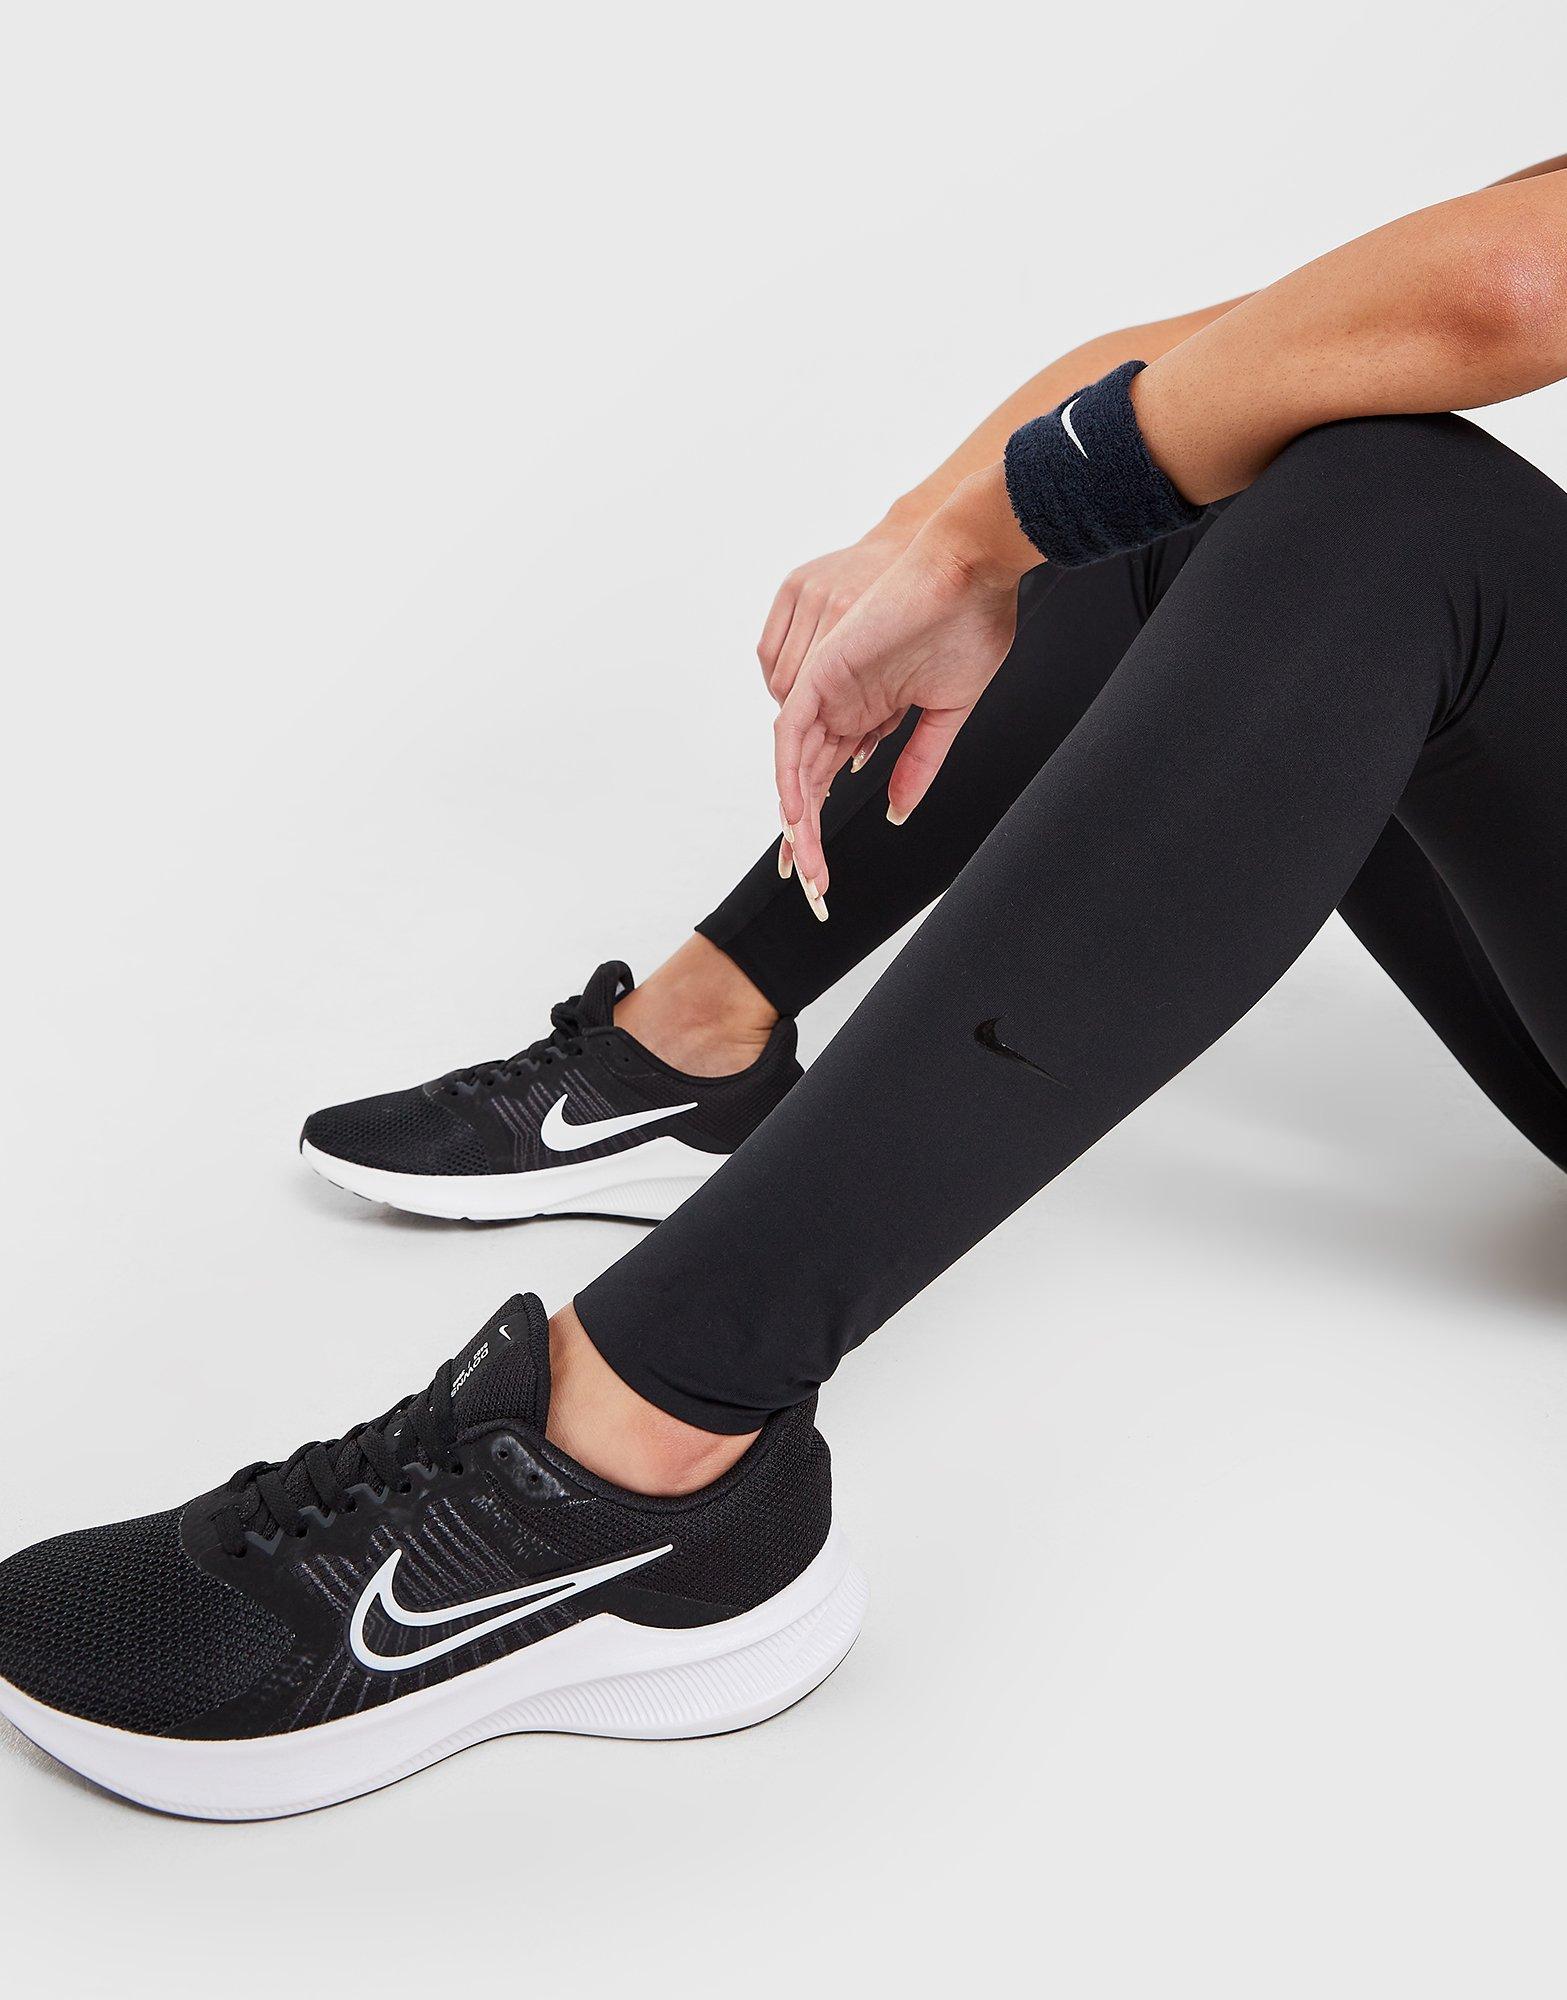 nike womens one luxe tights